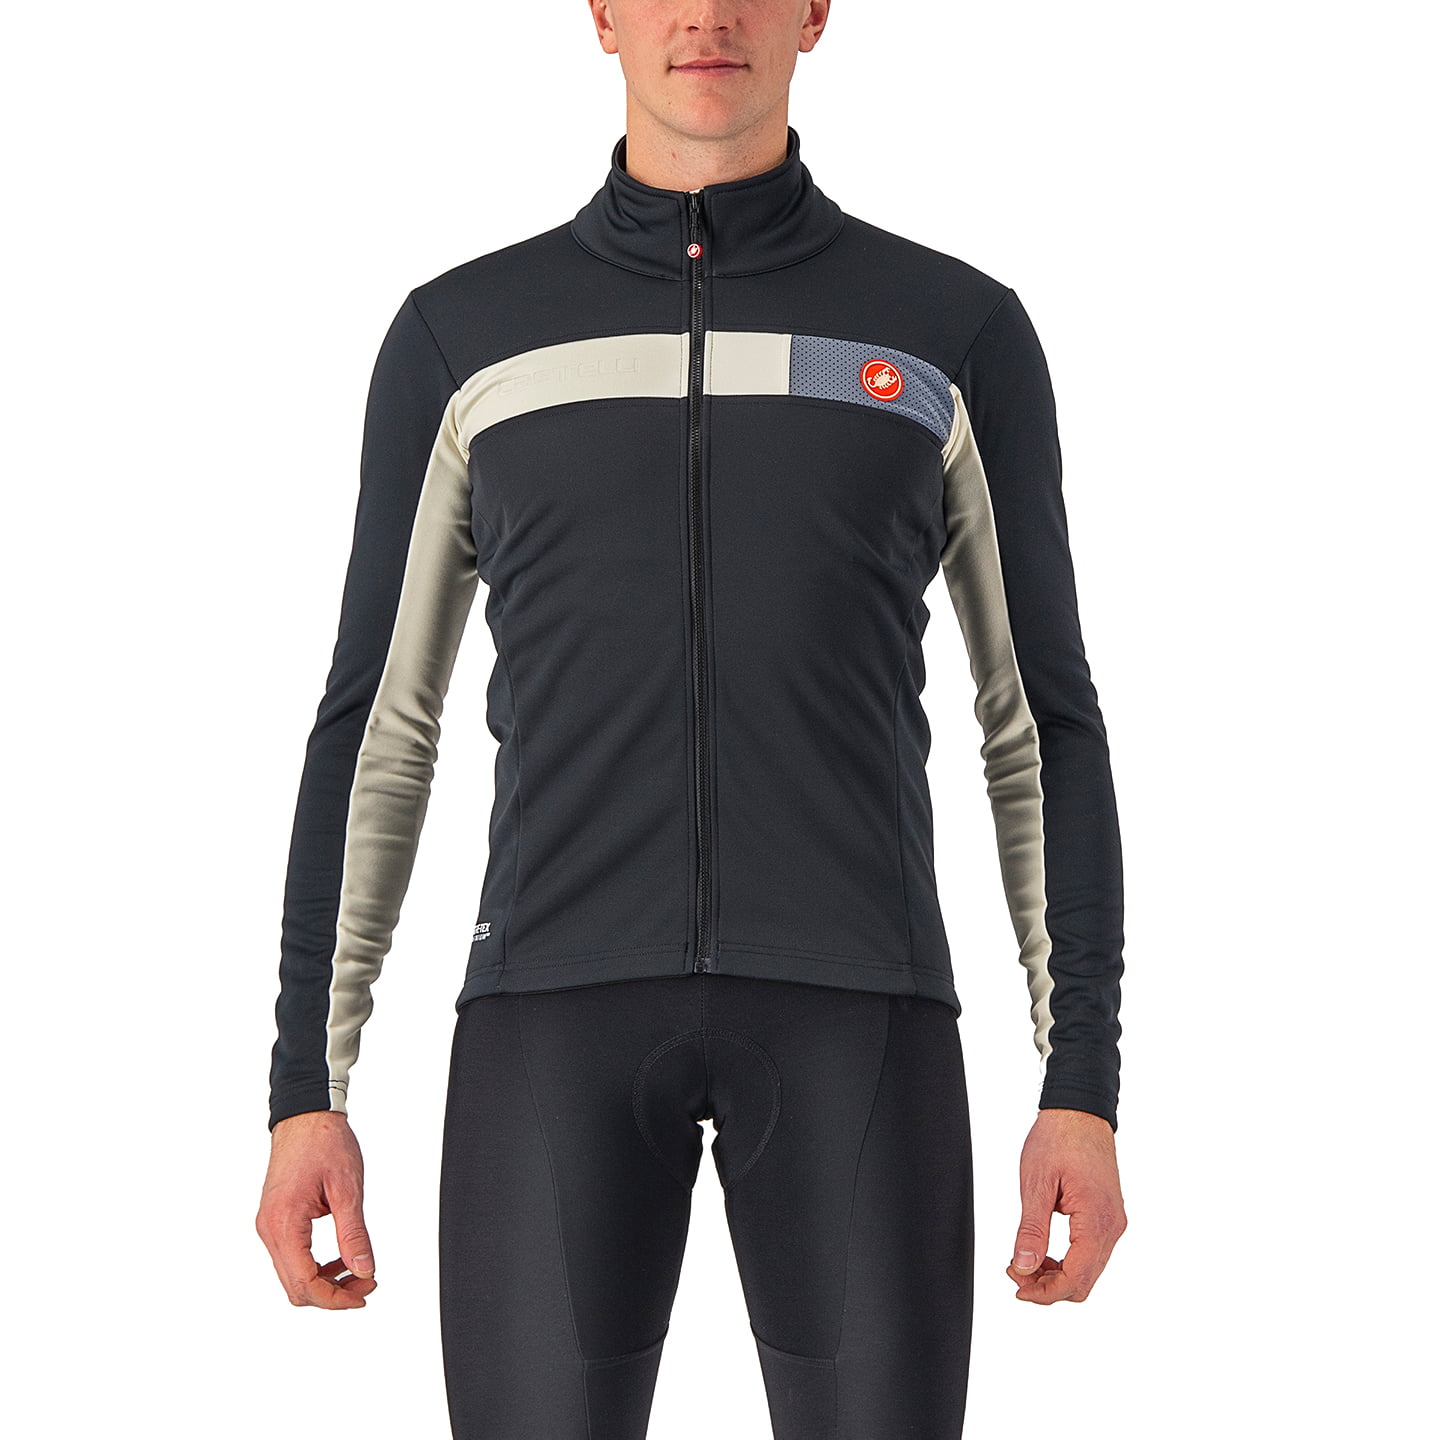 CASTELLI Mortirolo 6S Winter Jacket Thermal Jacket, for men, size M, Cycle jacket, Cycling clothing